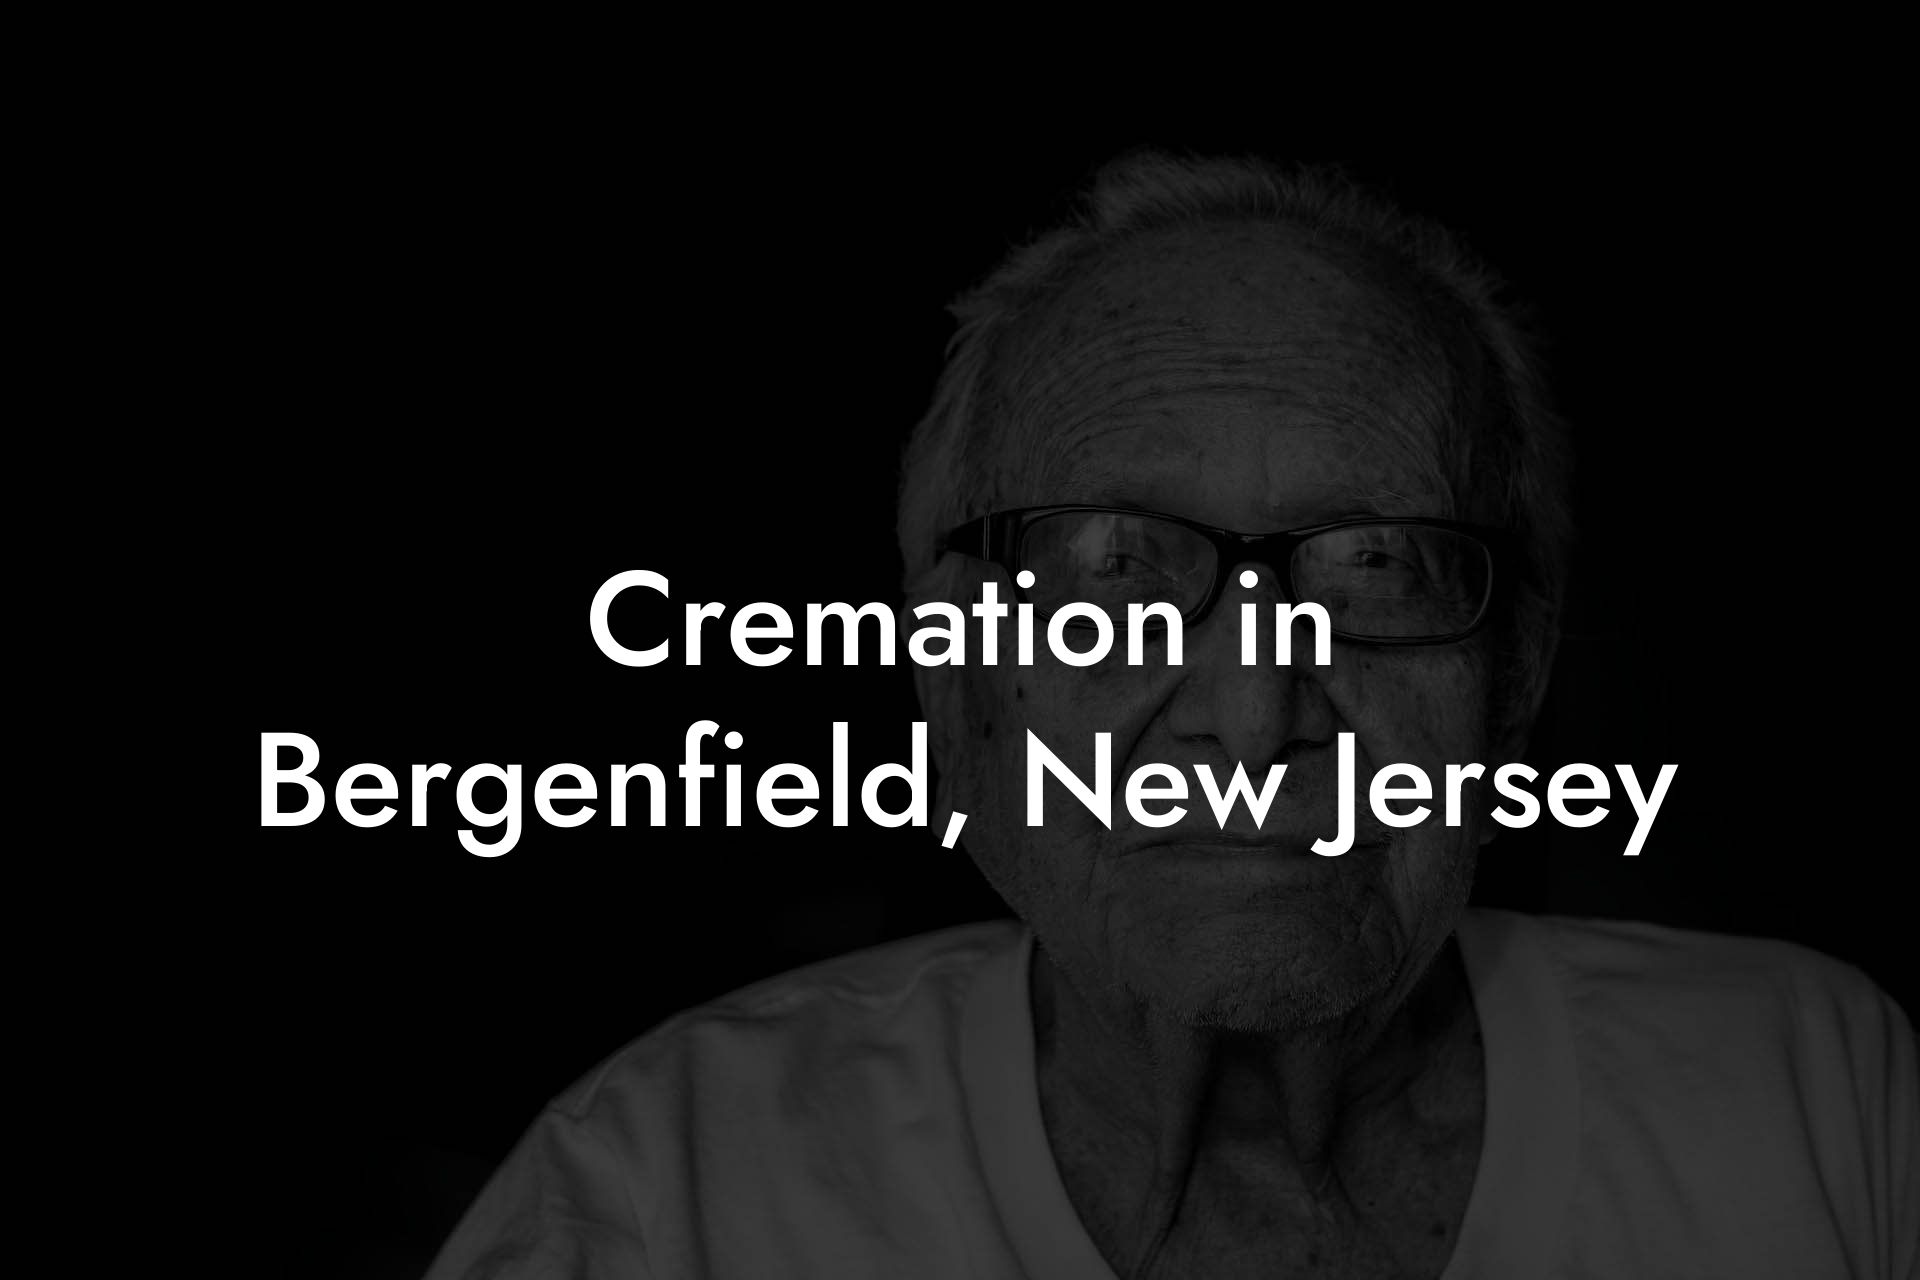 Cremation in Bergenfield, New Jersey